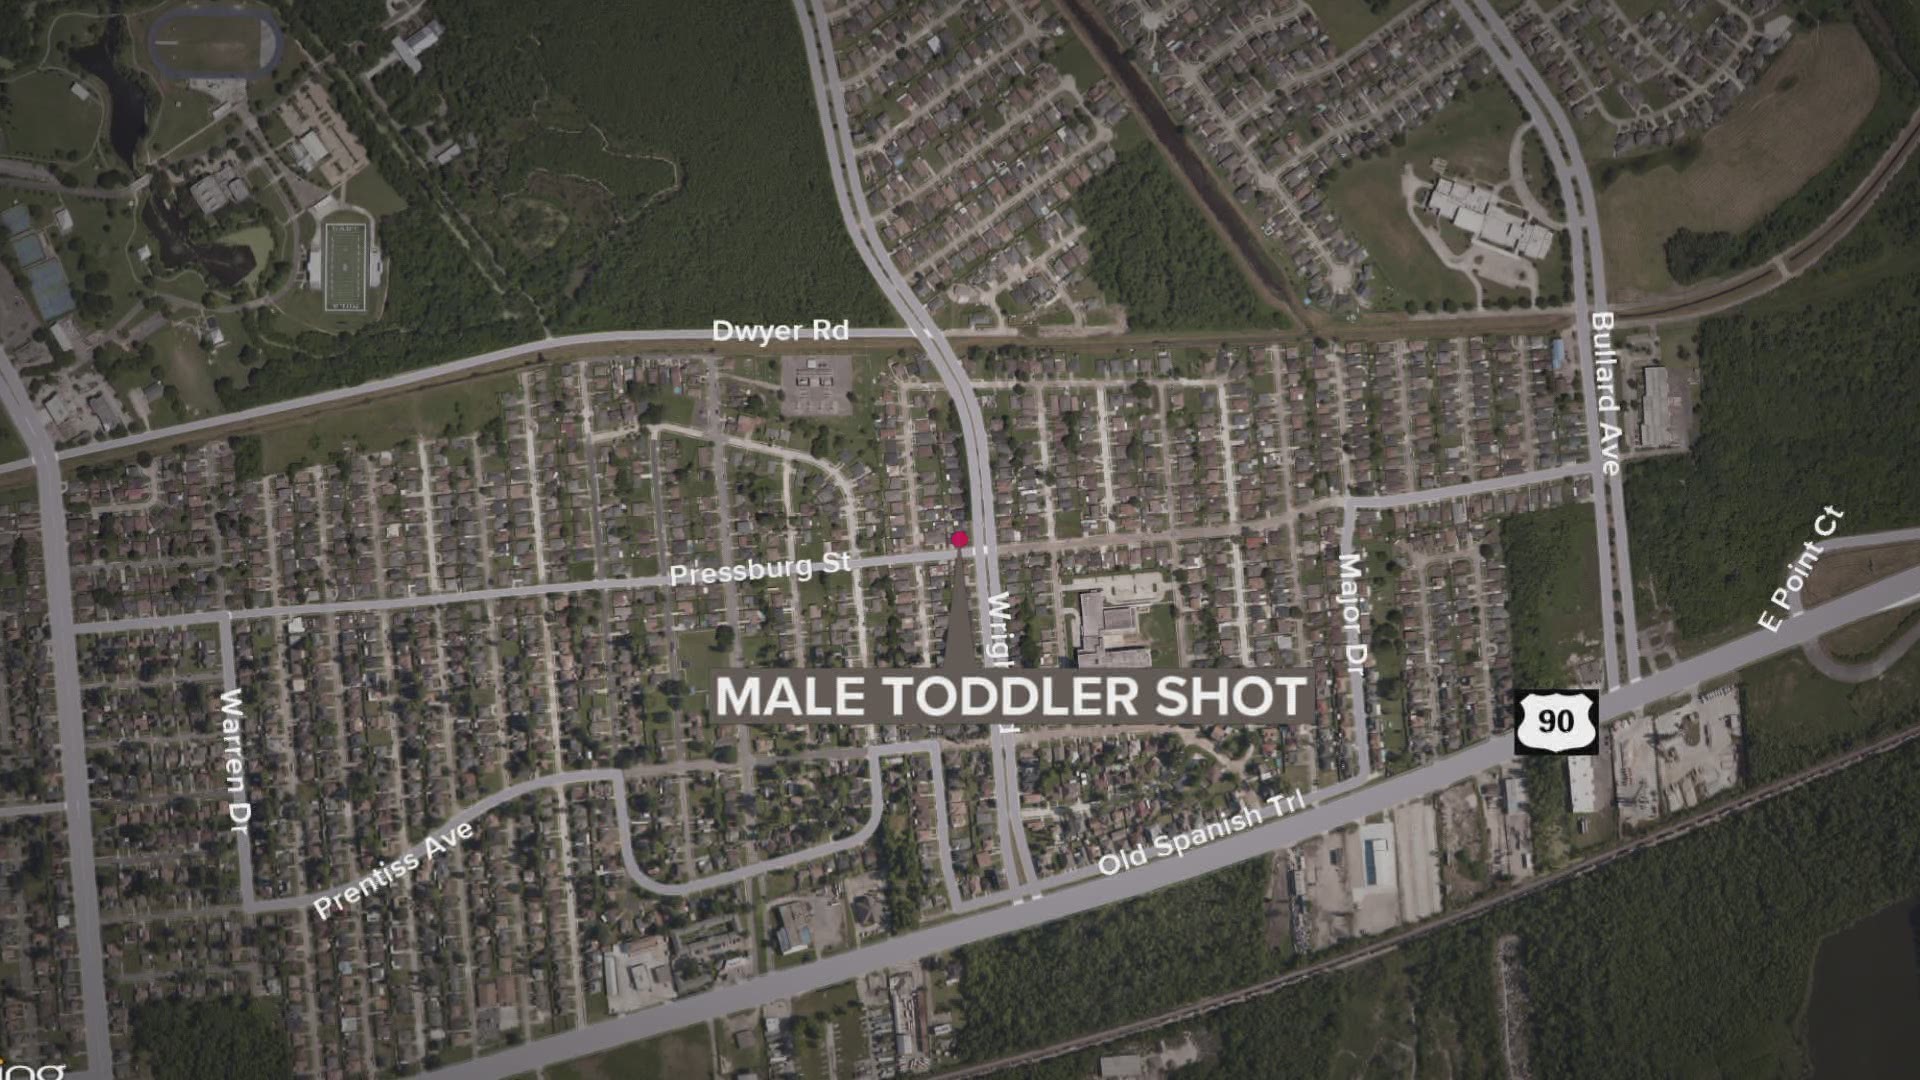 Toddler shot in New Orleans East